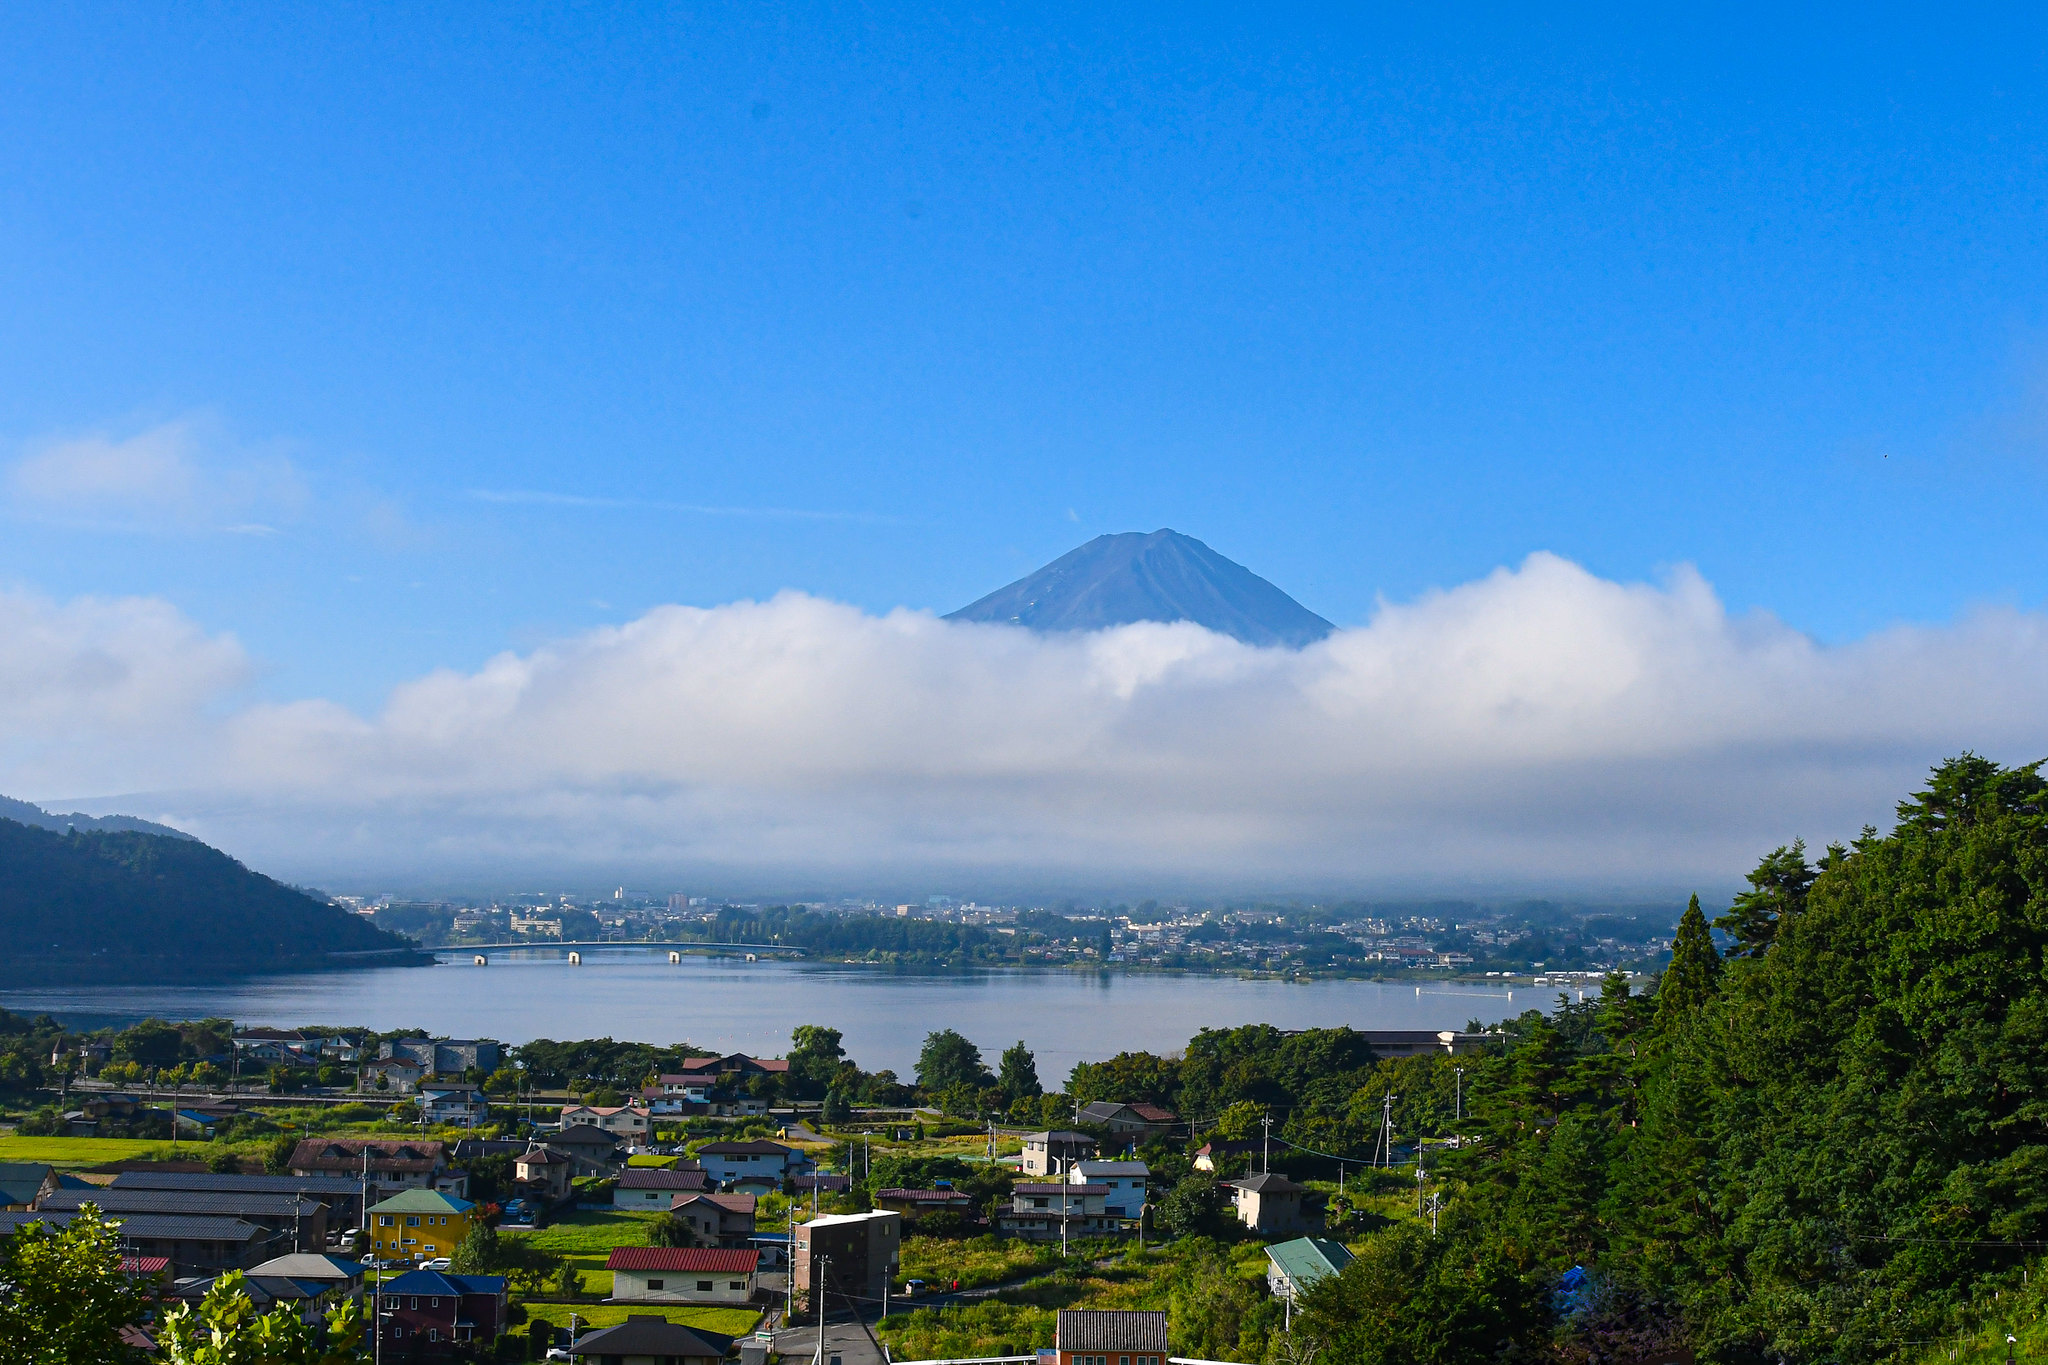 View of Mount Fuji from La Vista hotel in Kawaguchi, September 4, 2022 (by Steven Byles CC BY-SA 2.0 DEED via Flickr).